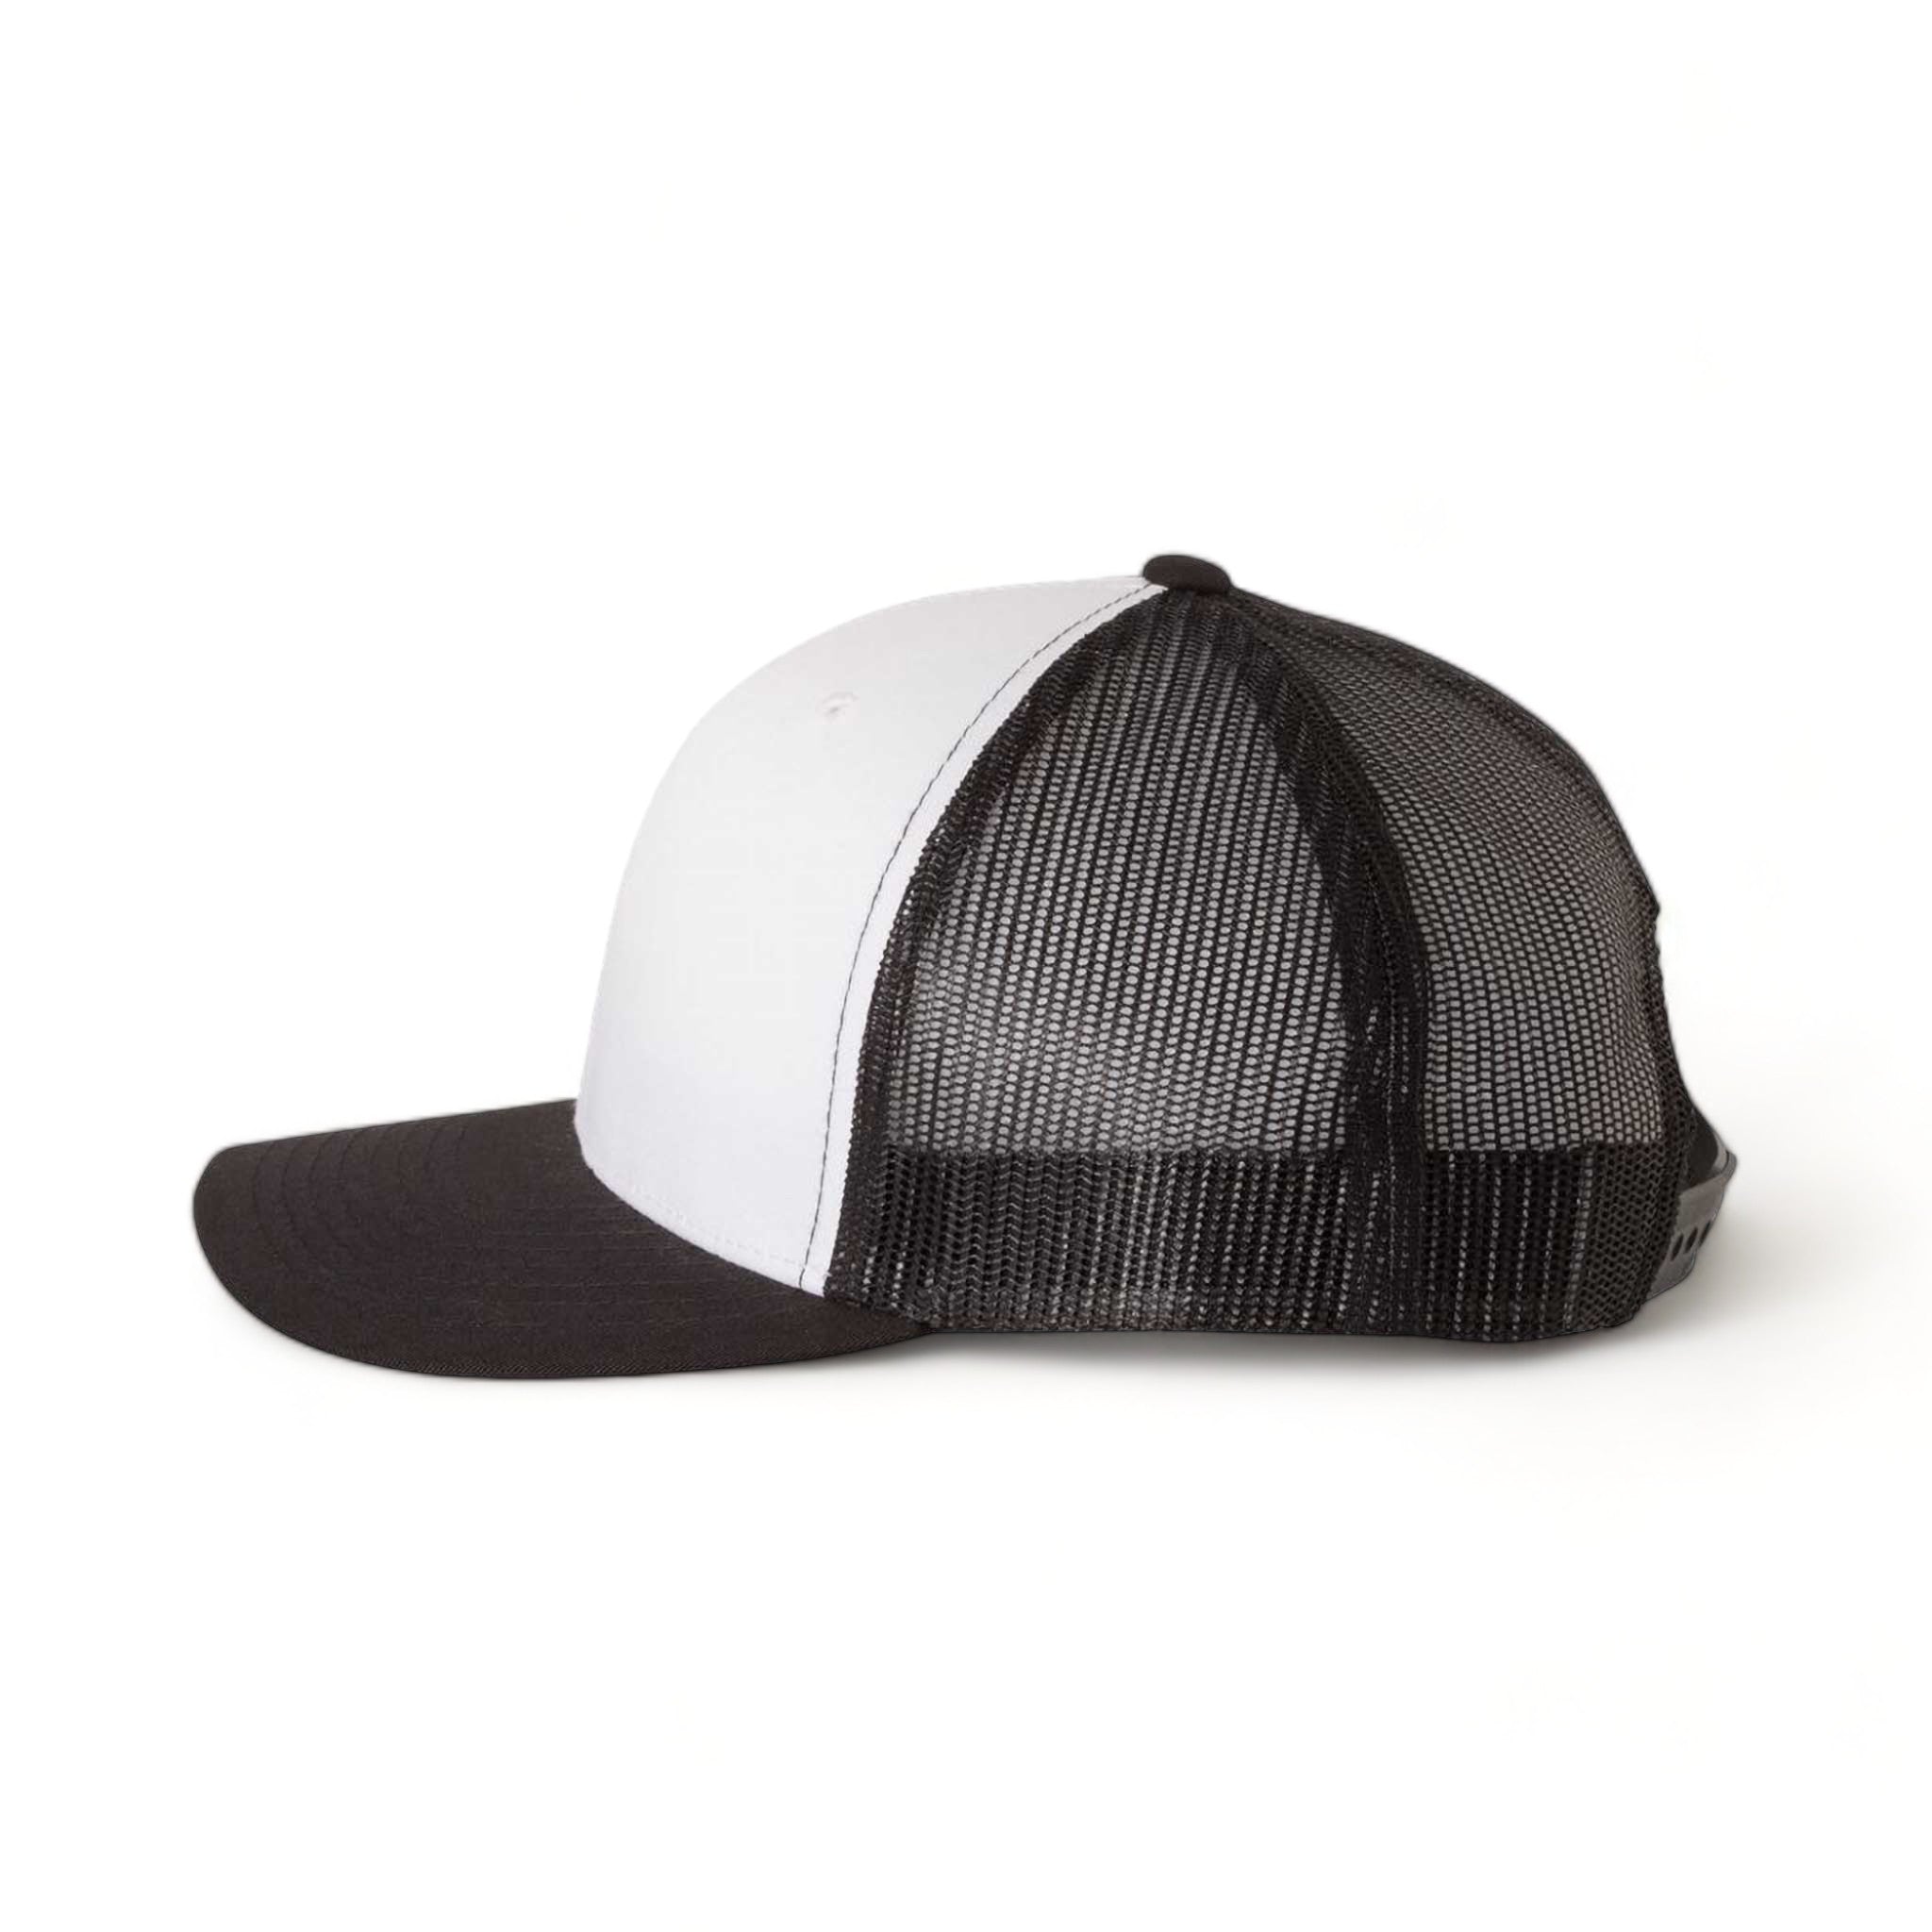 Side view of YP Classics 6606 custom hat in black, white and black